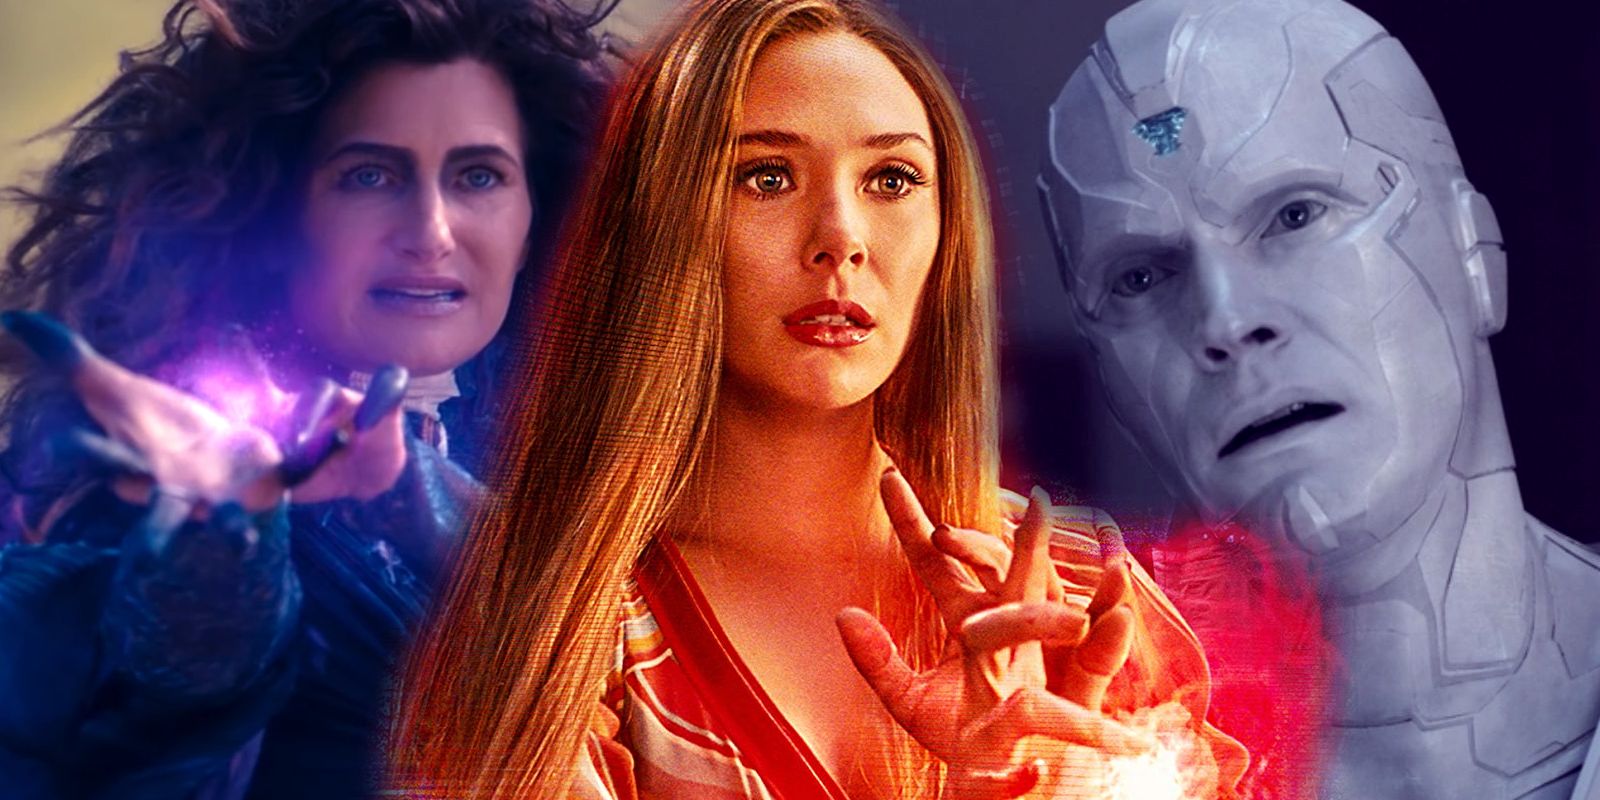 Agatha Harkness (Kathryn Hahn) summons her purple magic; Wanda Maximoff (Elizabeth Olsen) conjures red chaos magic; White Vision (Paul Bettany) contemplates his existence